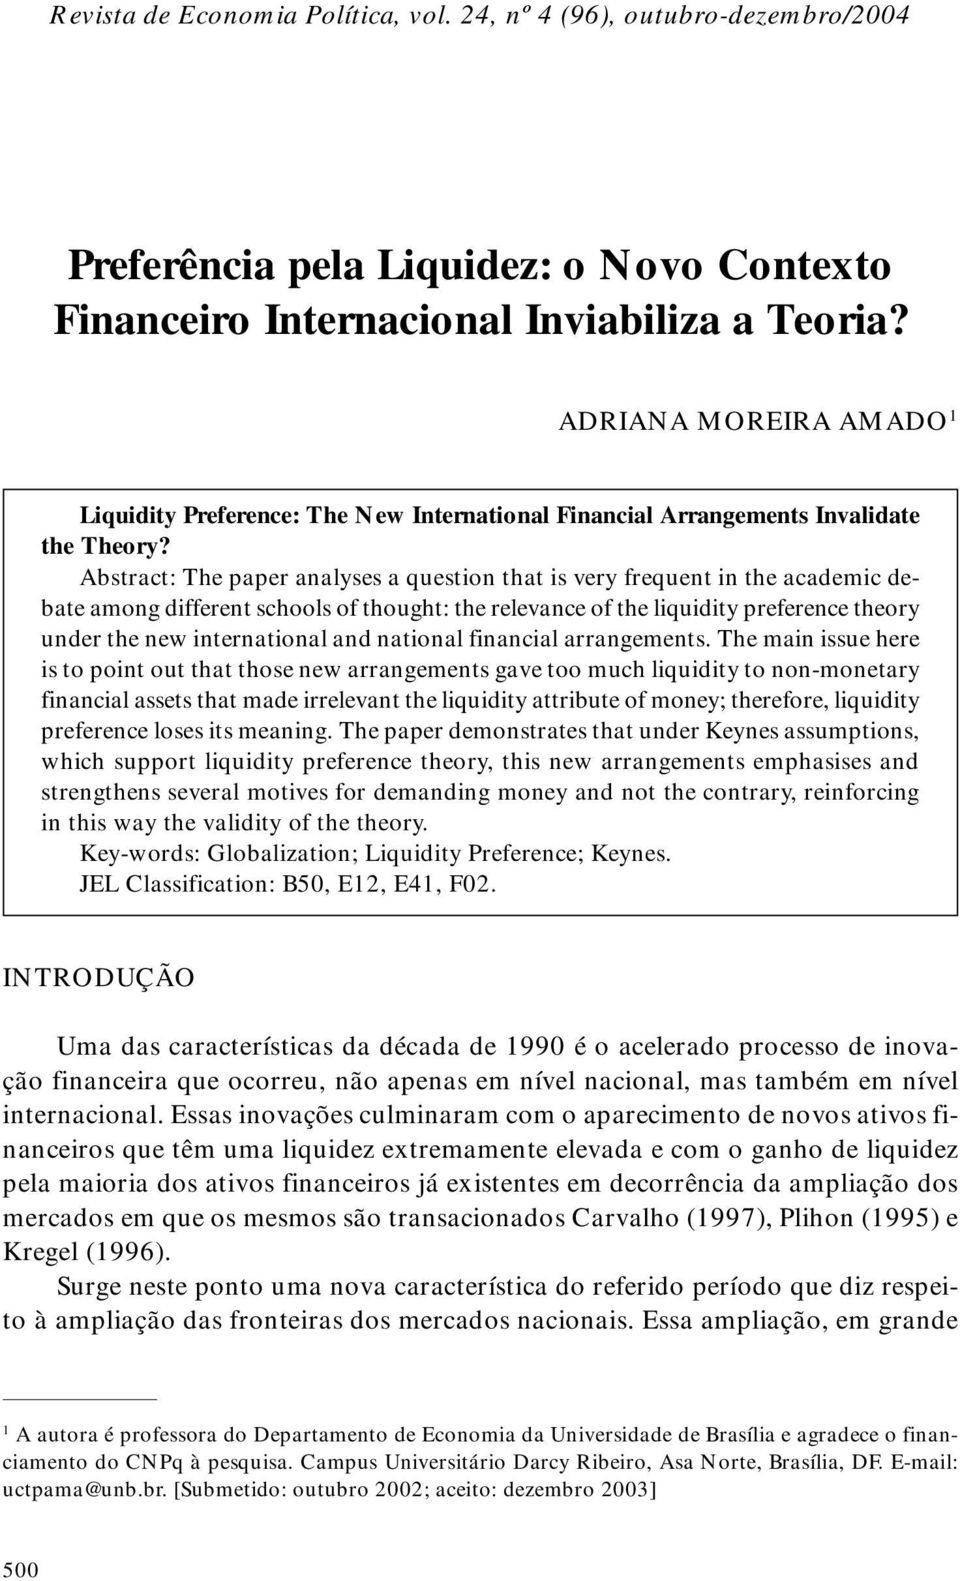 Abstract: The paper analyses a question that is very frequent in the academic debate among different schools of thought: the relevance of the liquidity preference theory under the new international